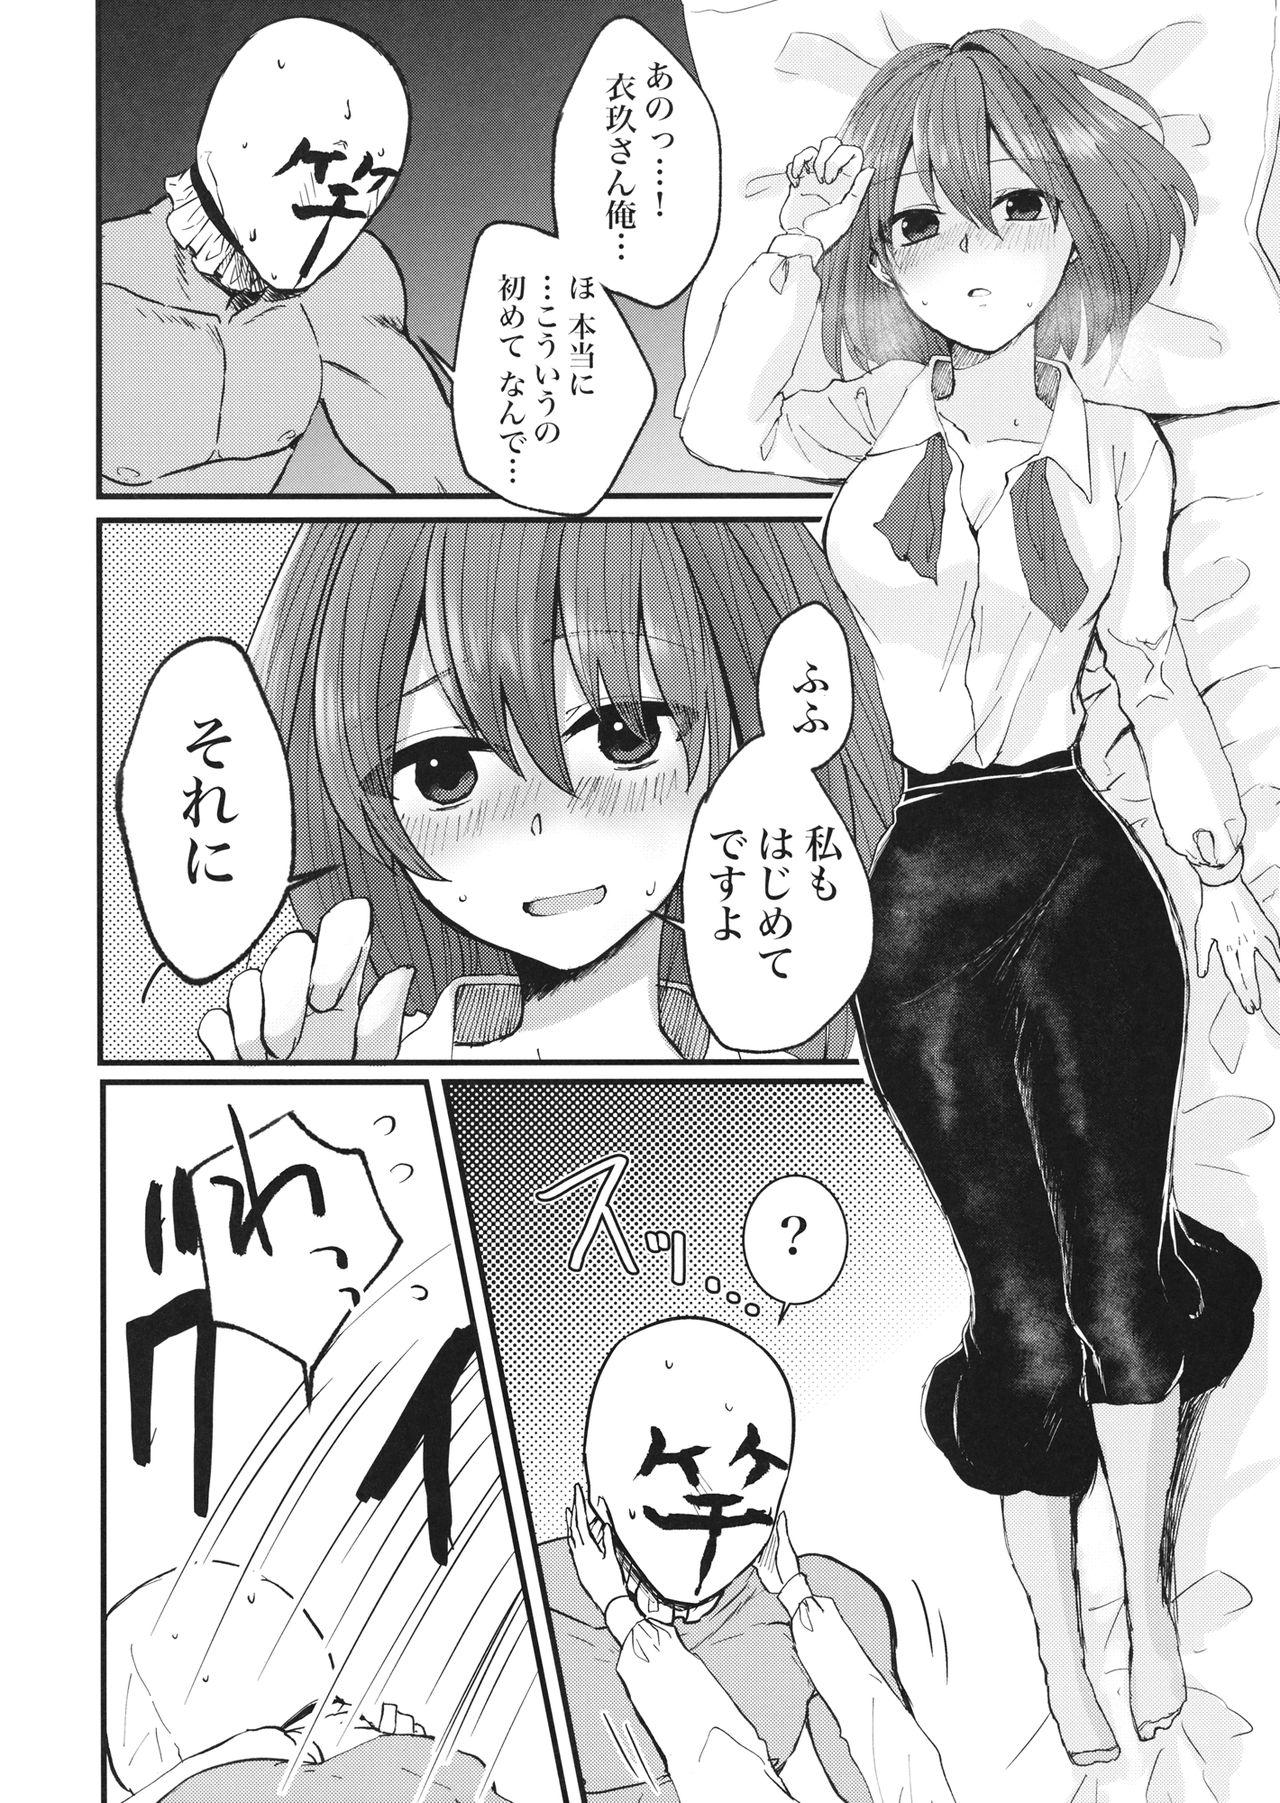 Culo 衣玖さんと一緒に色々頑張る本 - Touhou project Girls Getting Fucked - Page 11